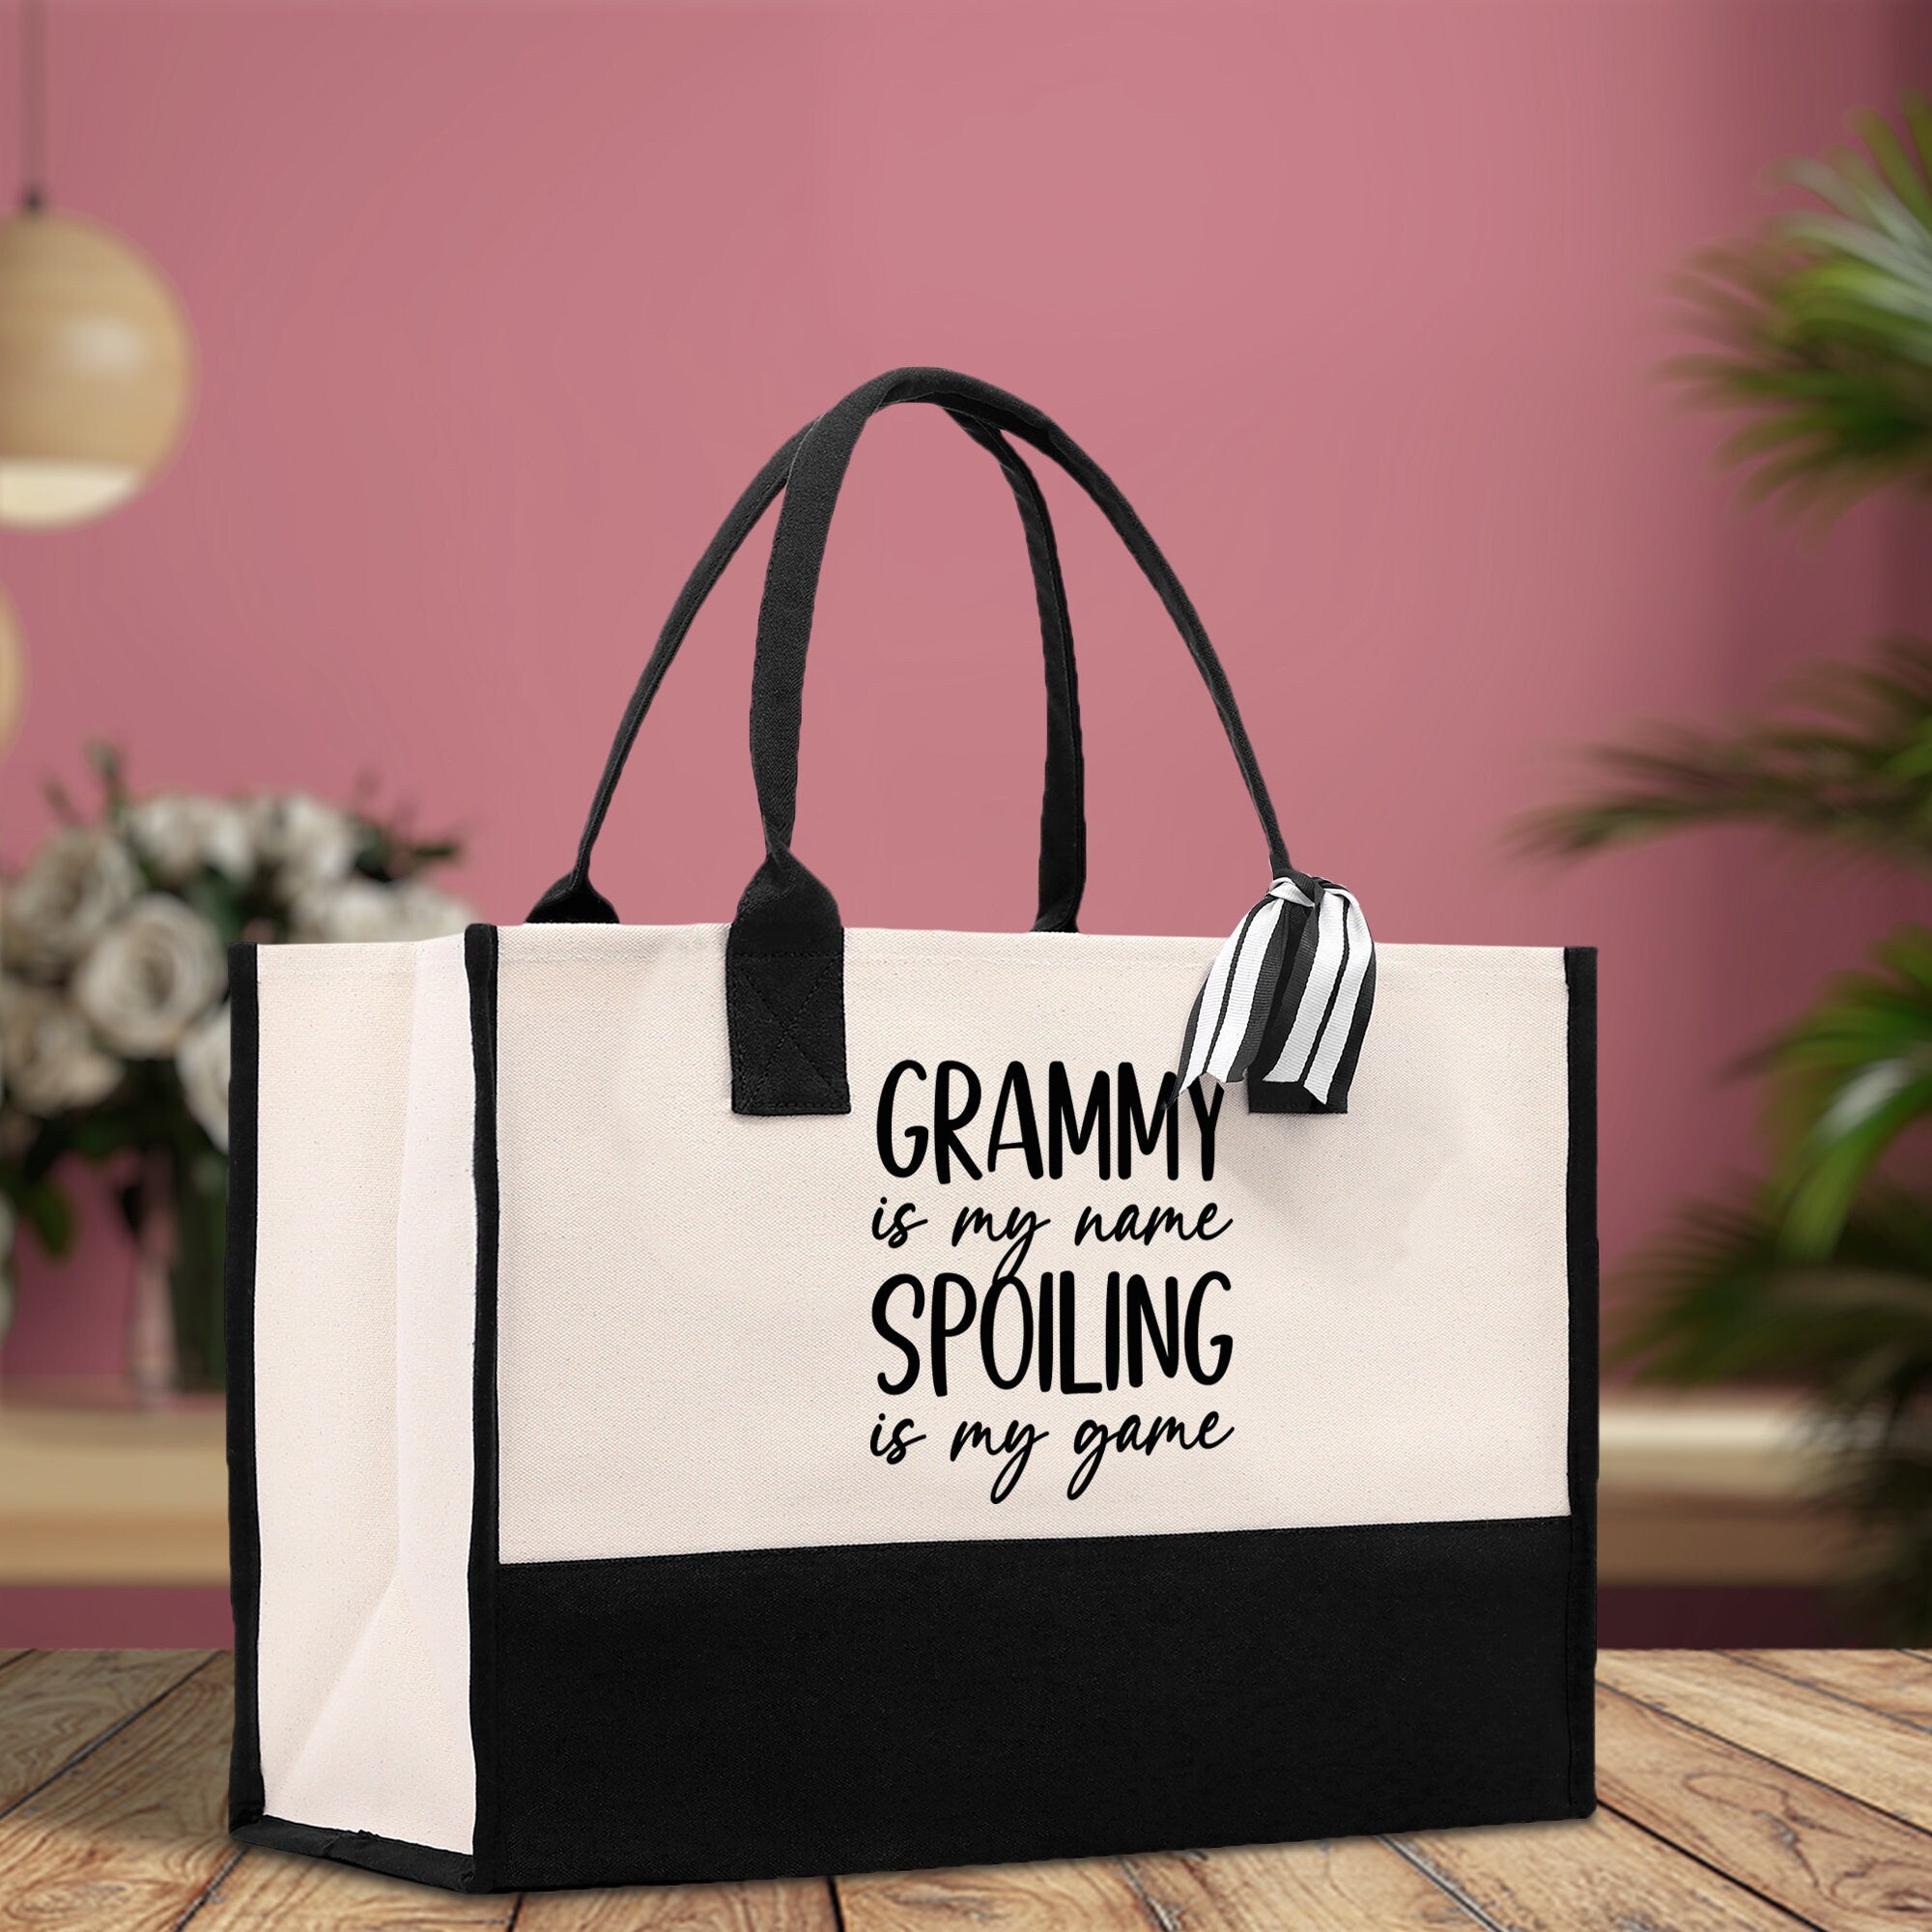 a black and white bag with a saying on it